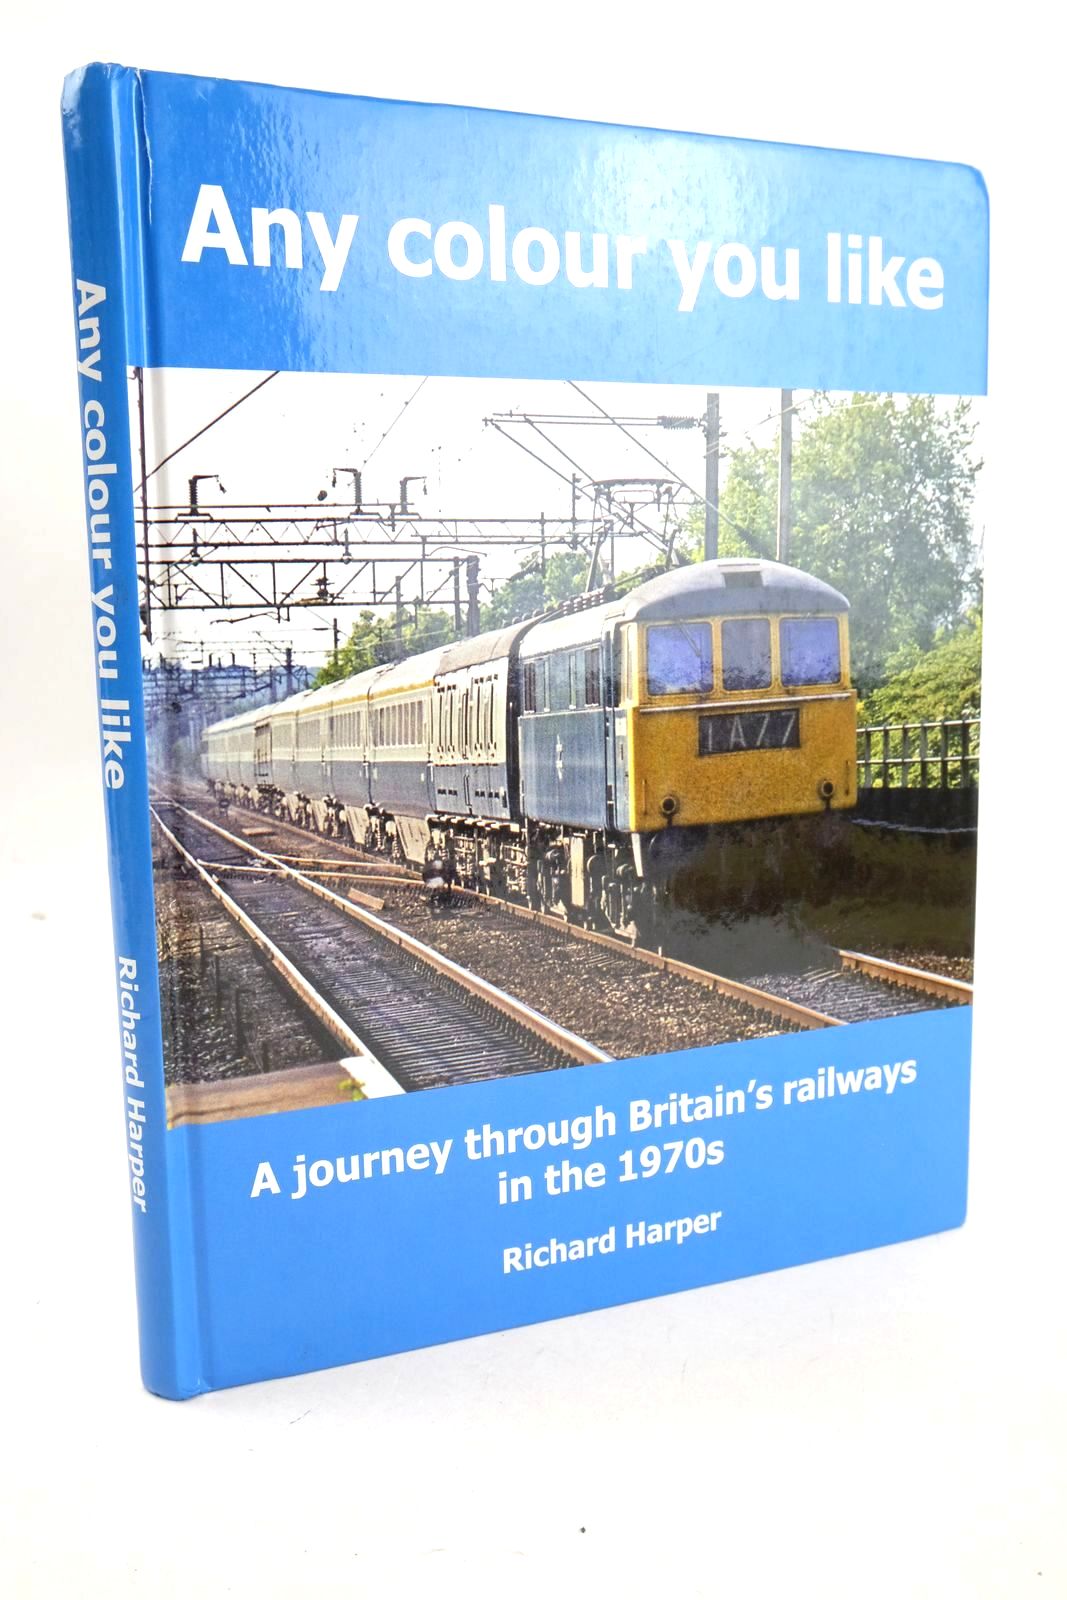 Photo of ANY COLOUR YOU LIKE (SO LONG AS IT'S BLUE) written by Harper, Richard published by Richard Harper (STOCK CODE: 1327031)  for sale by Stella & Rose's Books